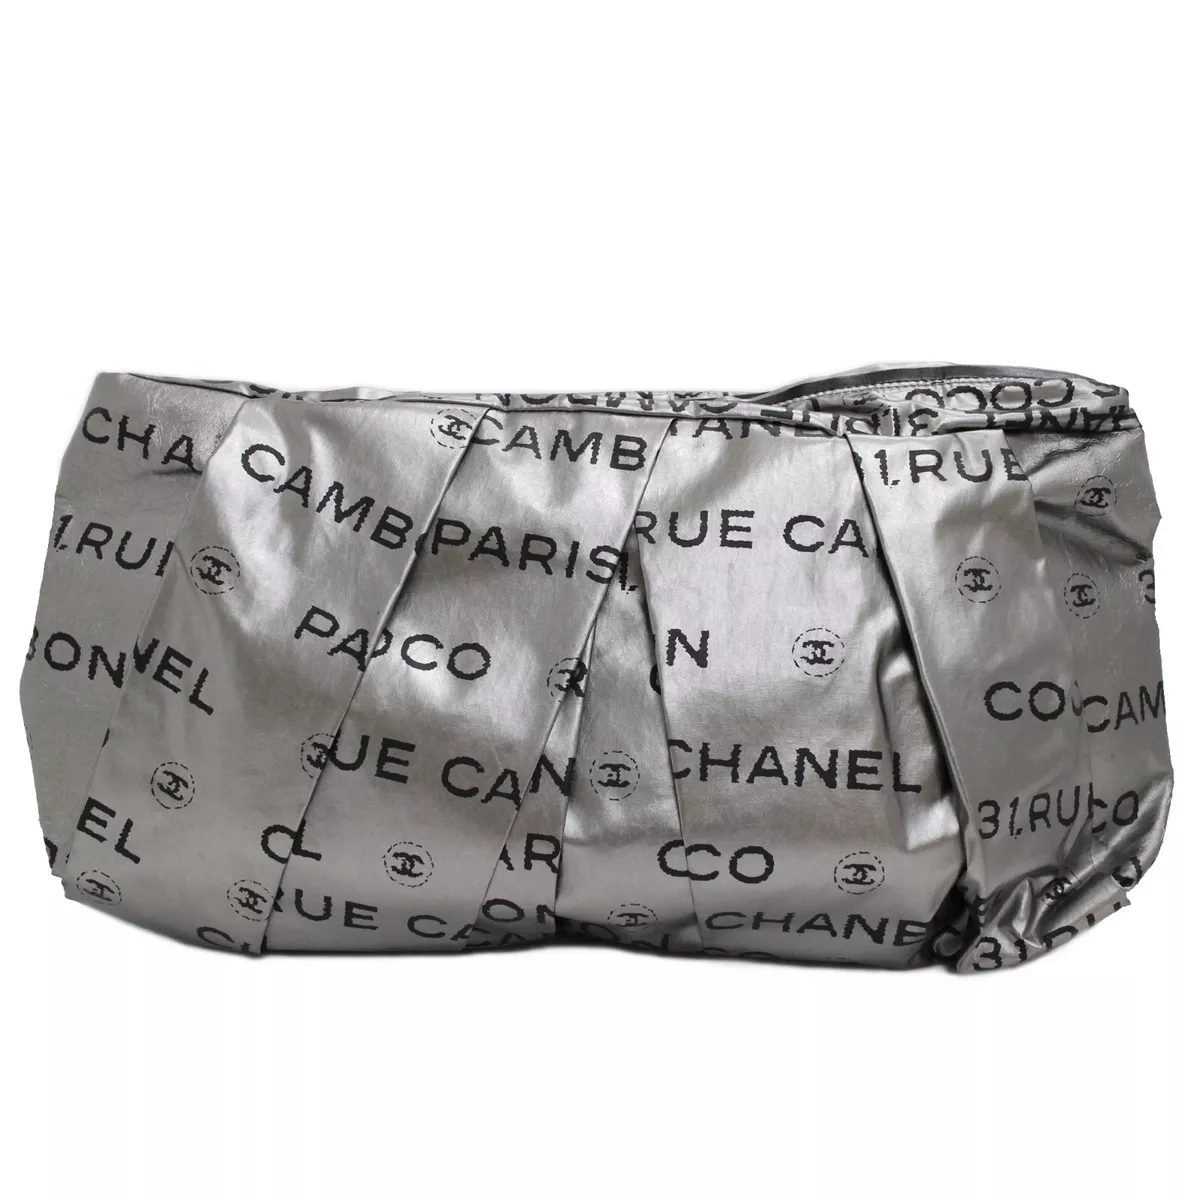 CHANEL Unlimited Line Nylon Silver Clutch Bag #2618 Rise-on